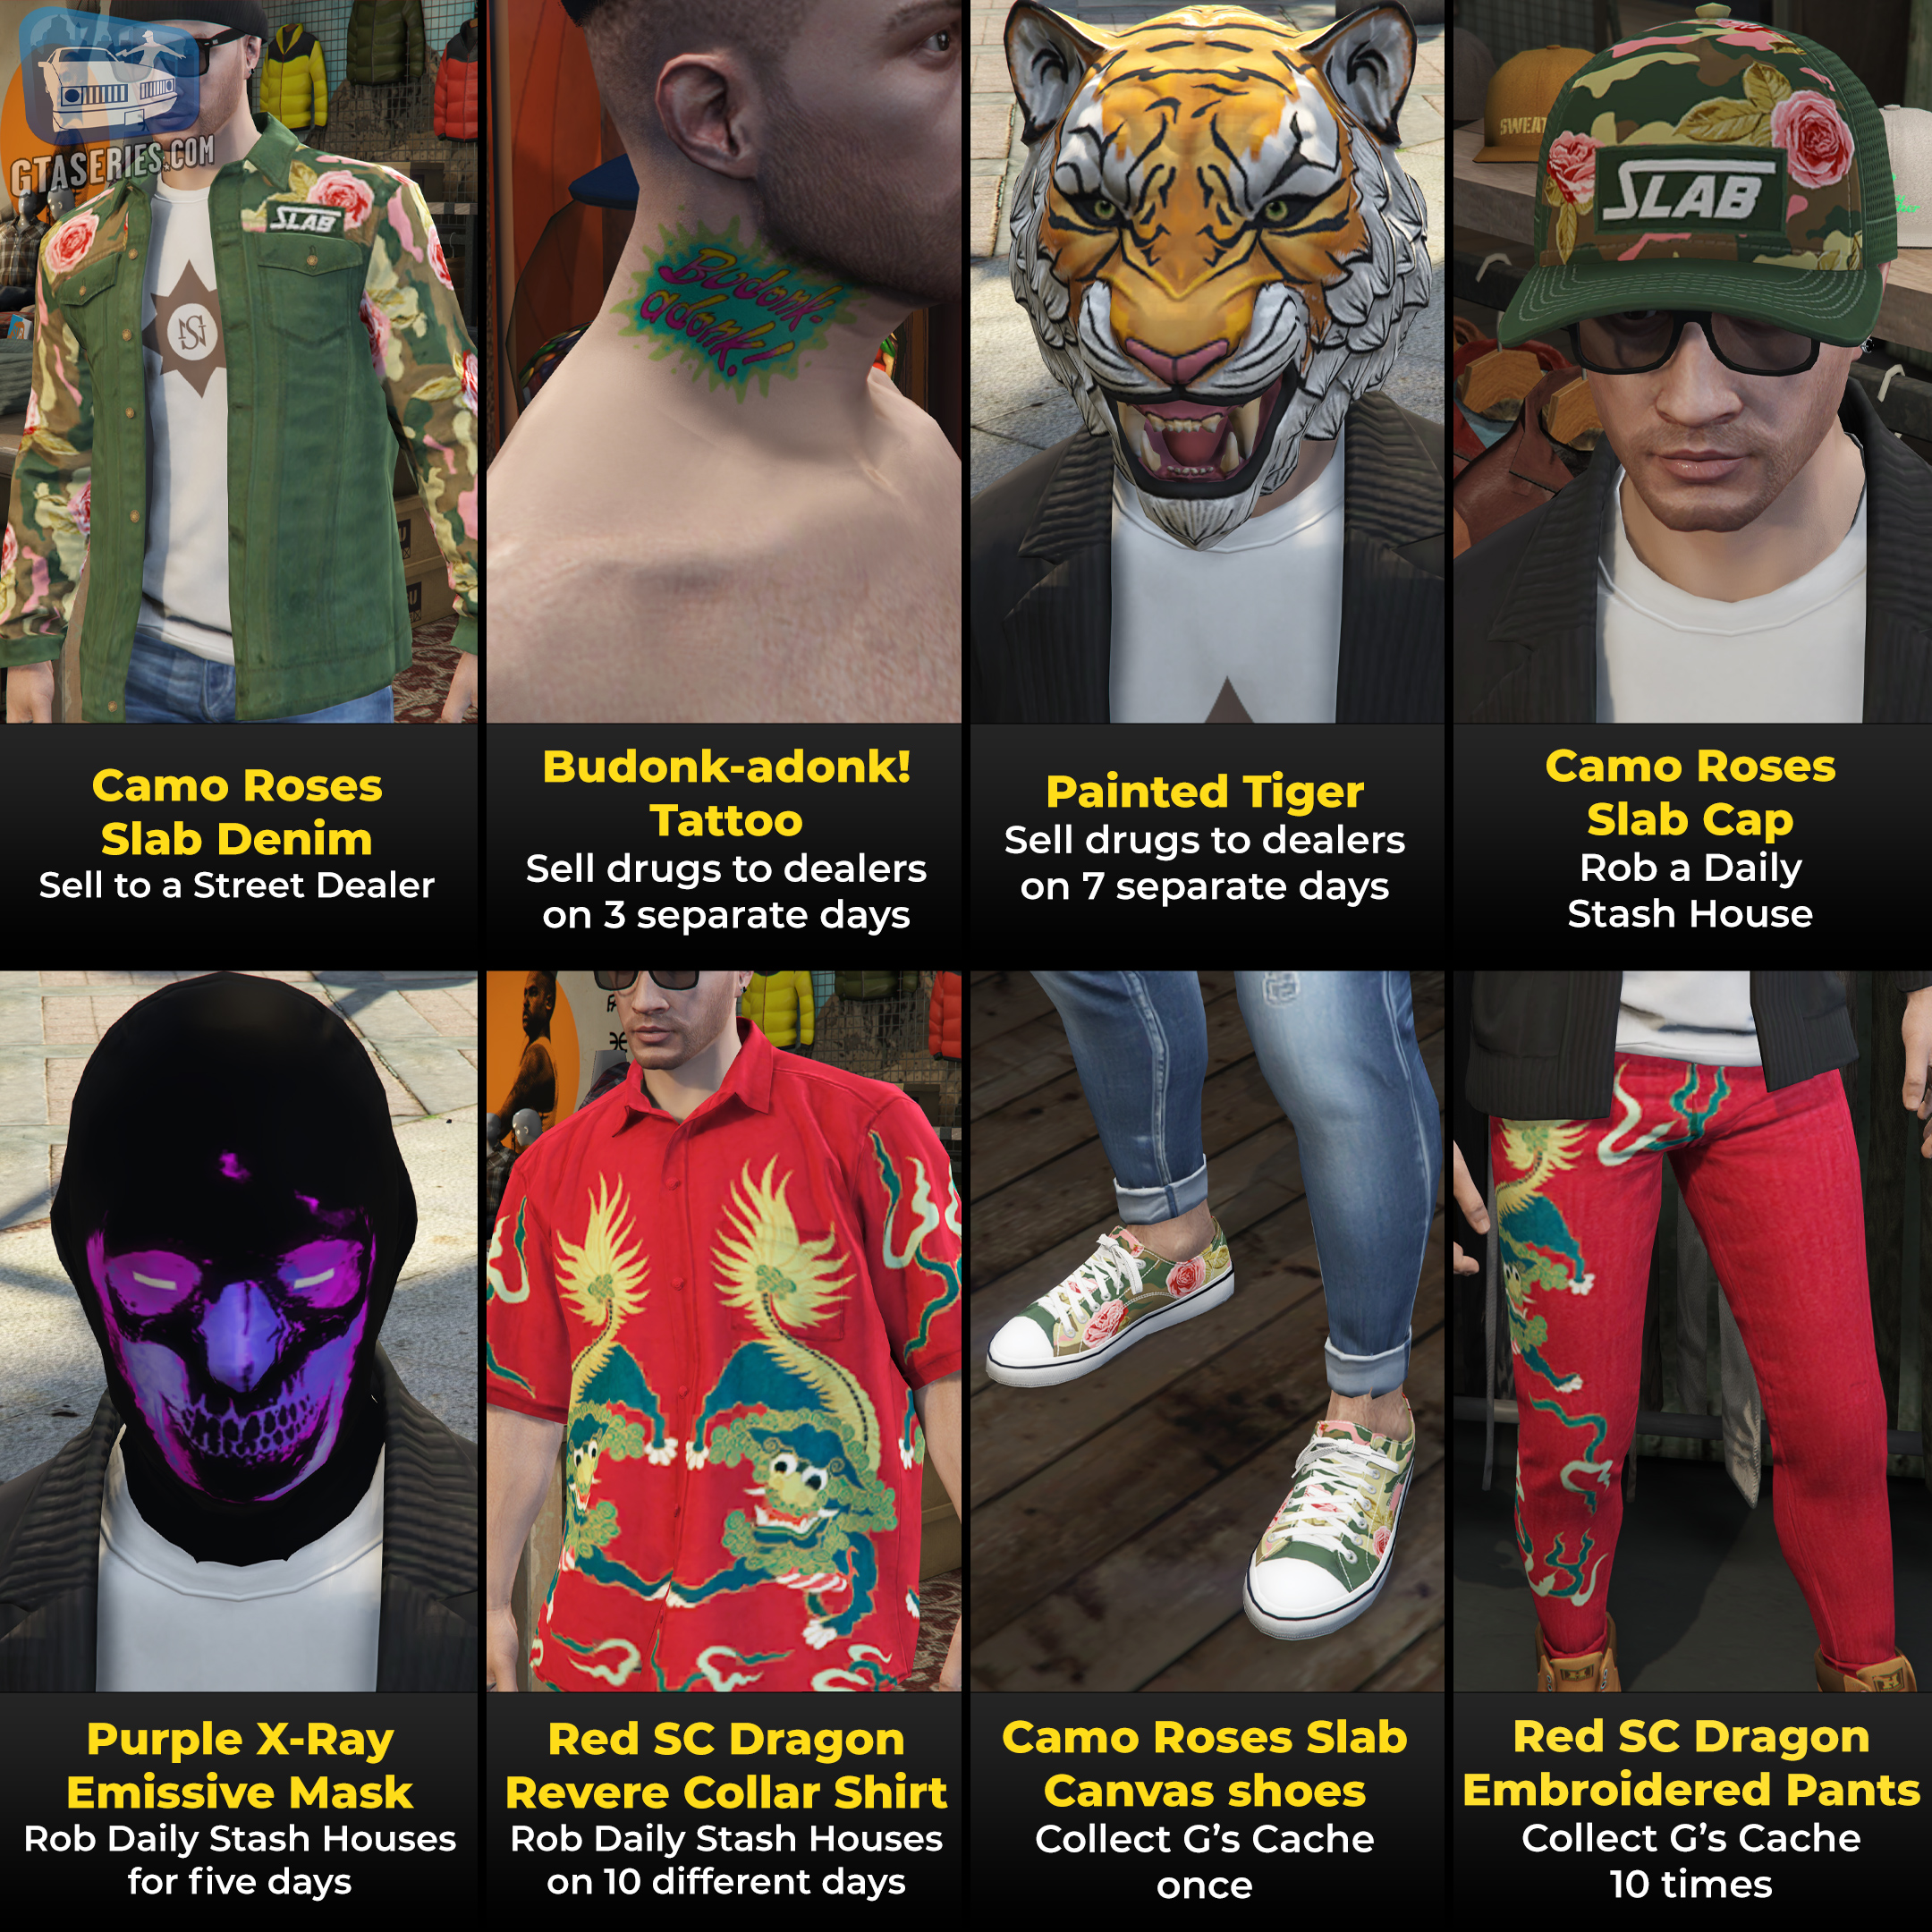 Twighlight Painted Rabbit: Unlocked by linking Prime Gaming to your Social  Club account Jan 19th-25th : r/gtaonline